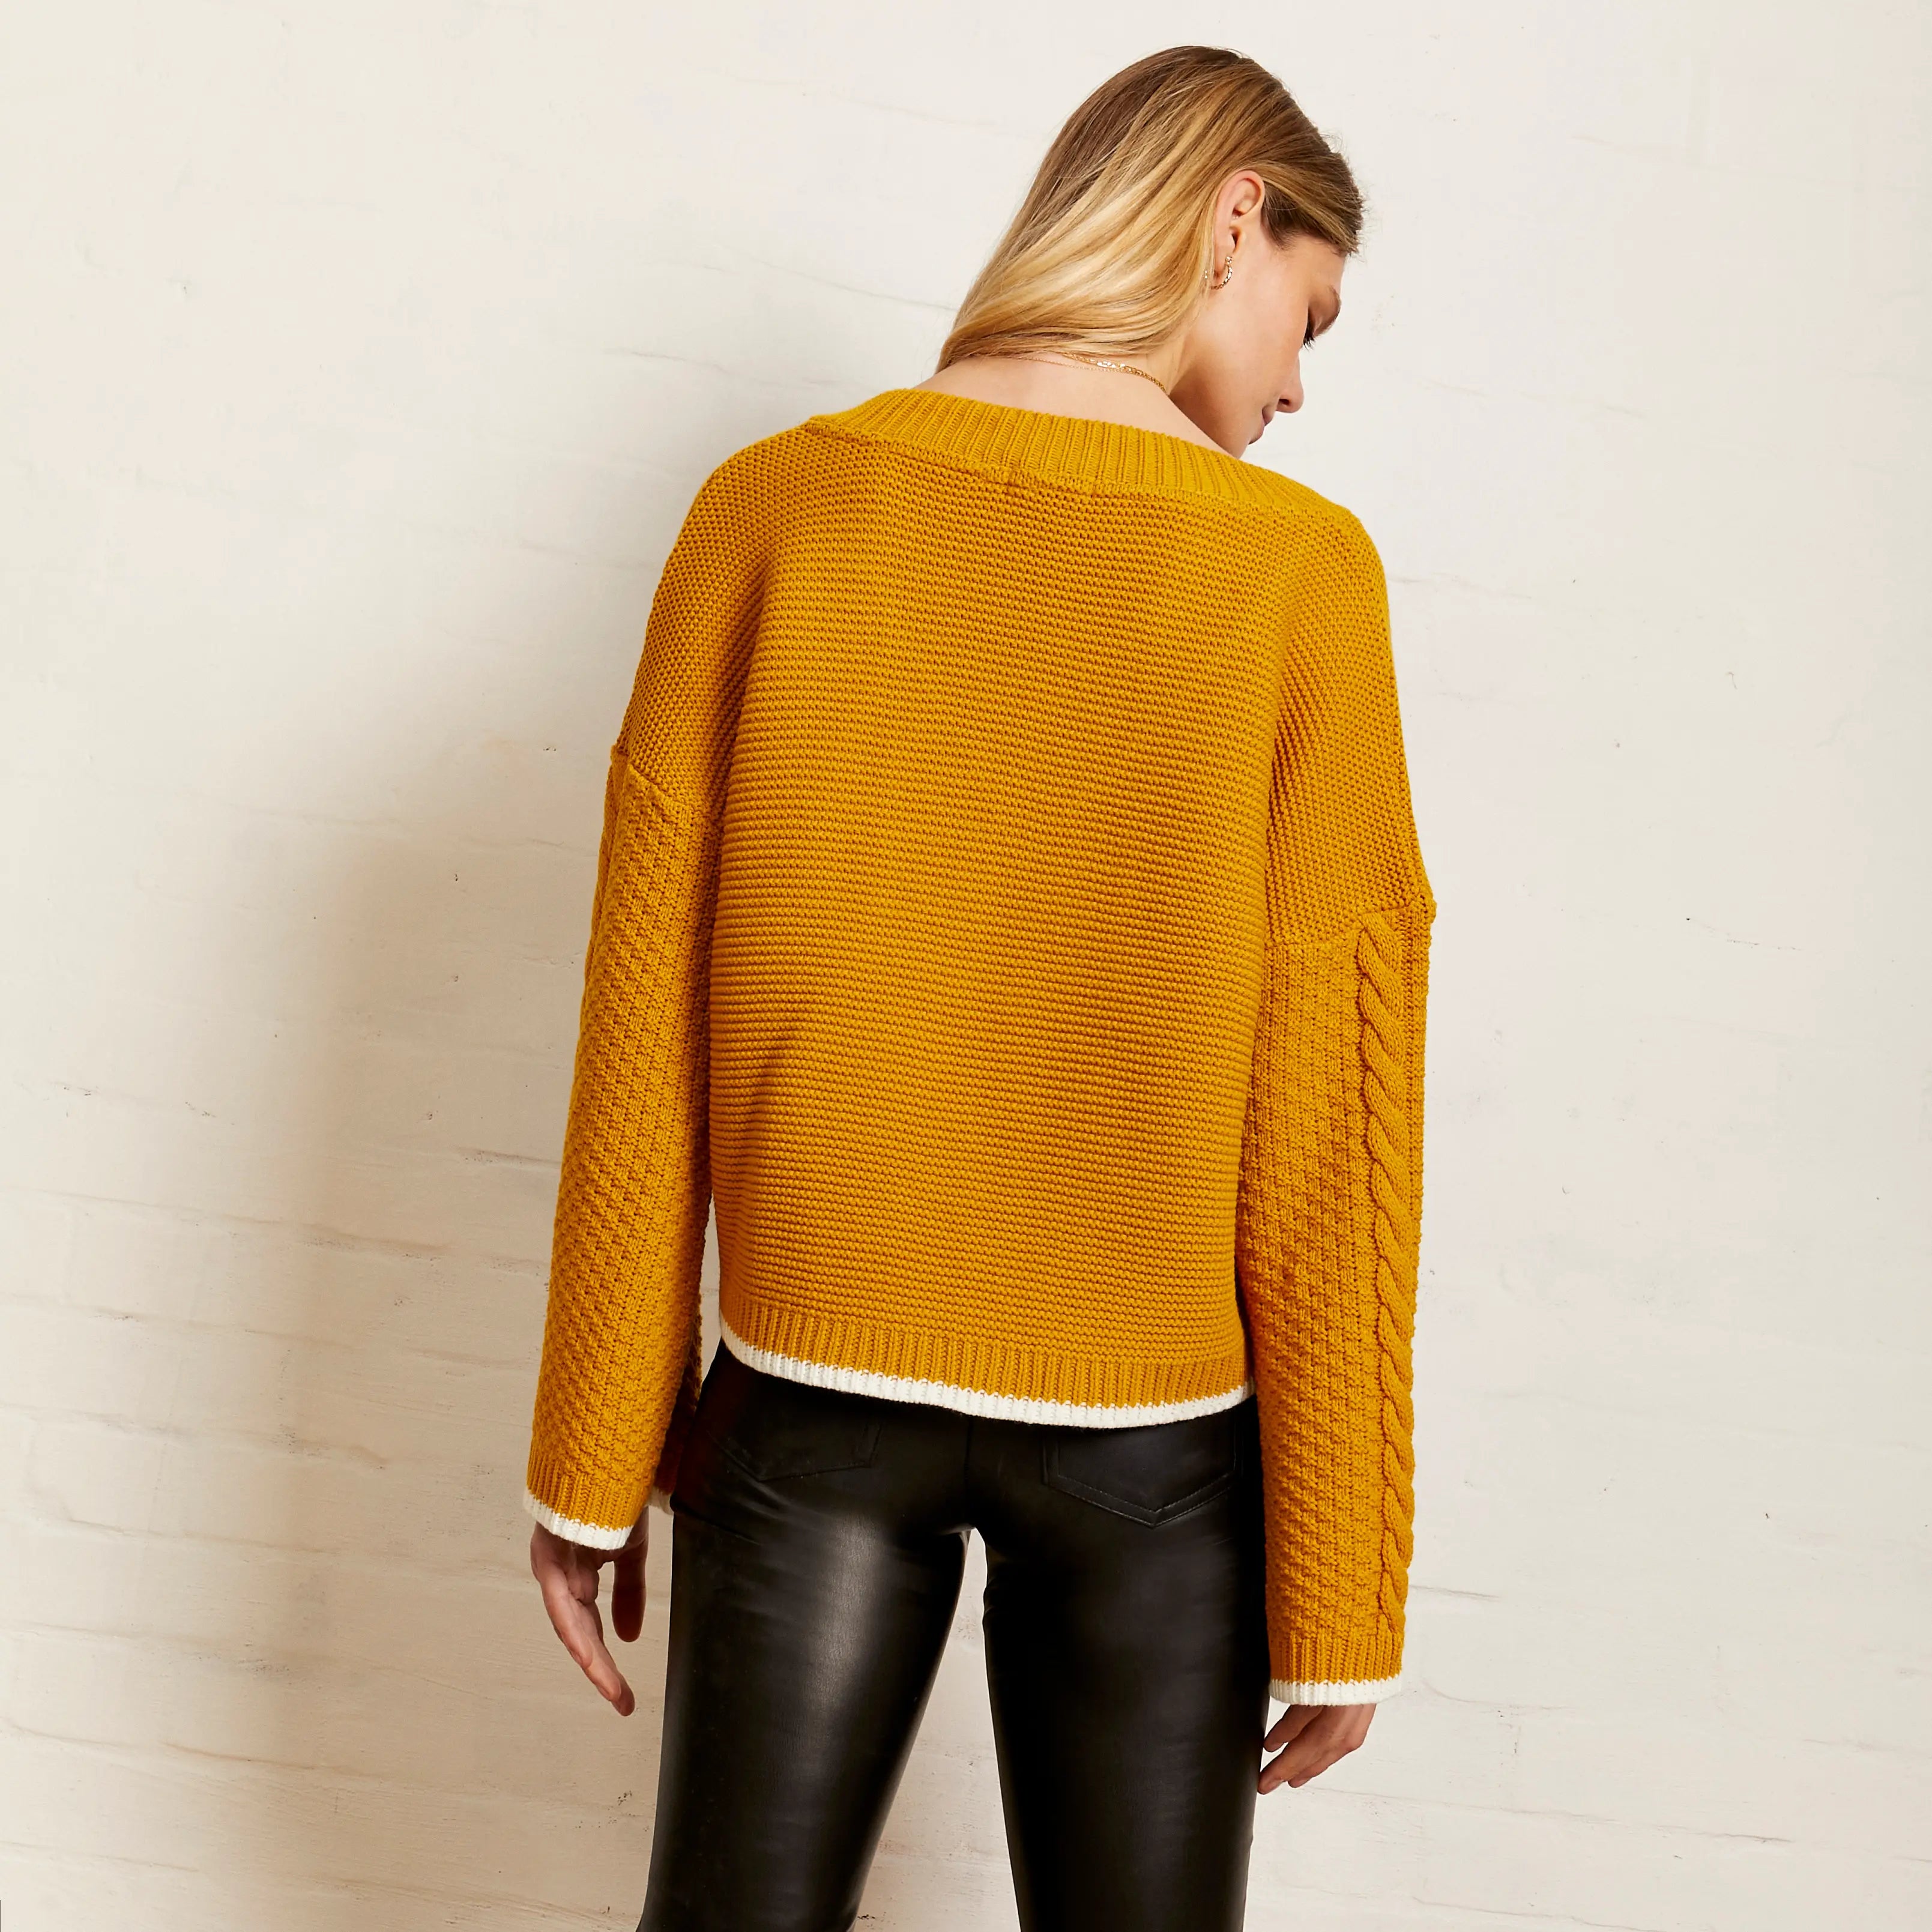 cara and the sky, womens vneck cable knit sweater in mustard yellow, womens fall winter sweaters, sustainable and ethically made, curate, shopthecurate